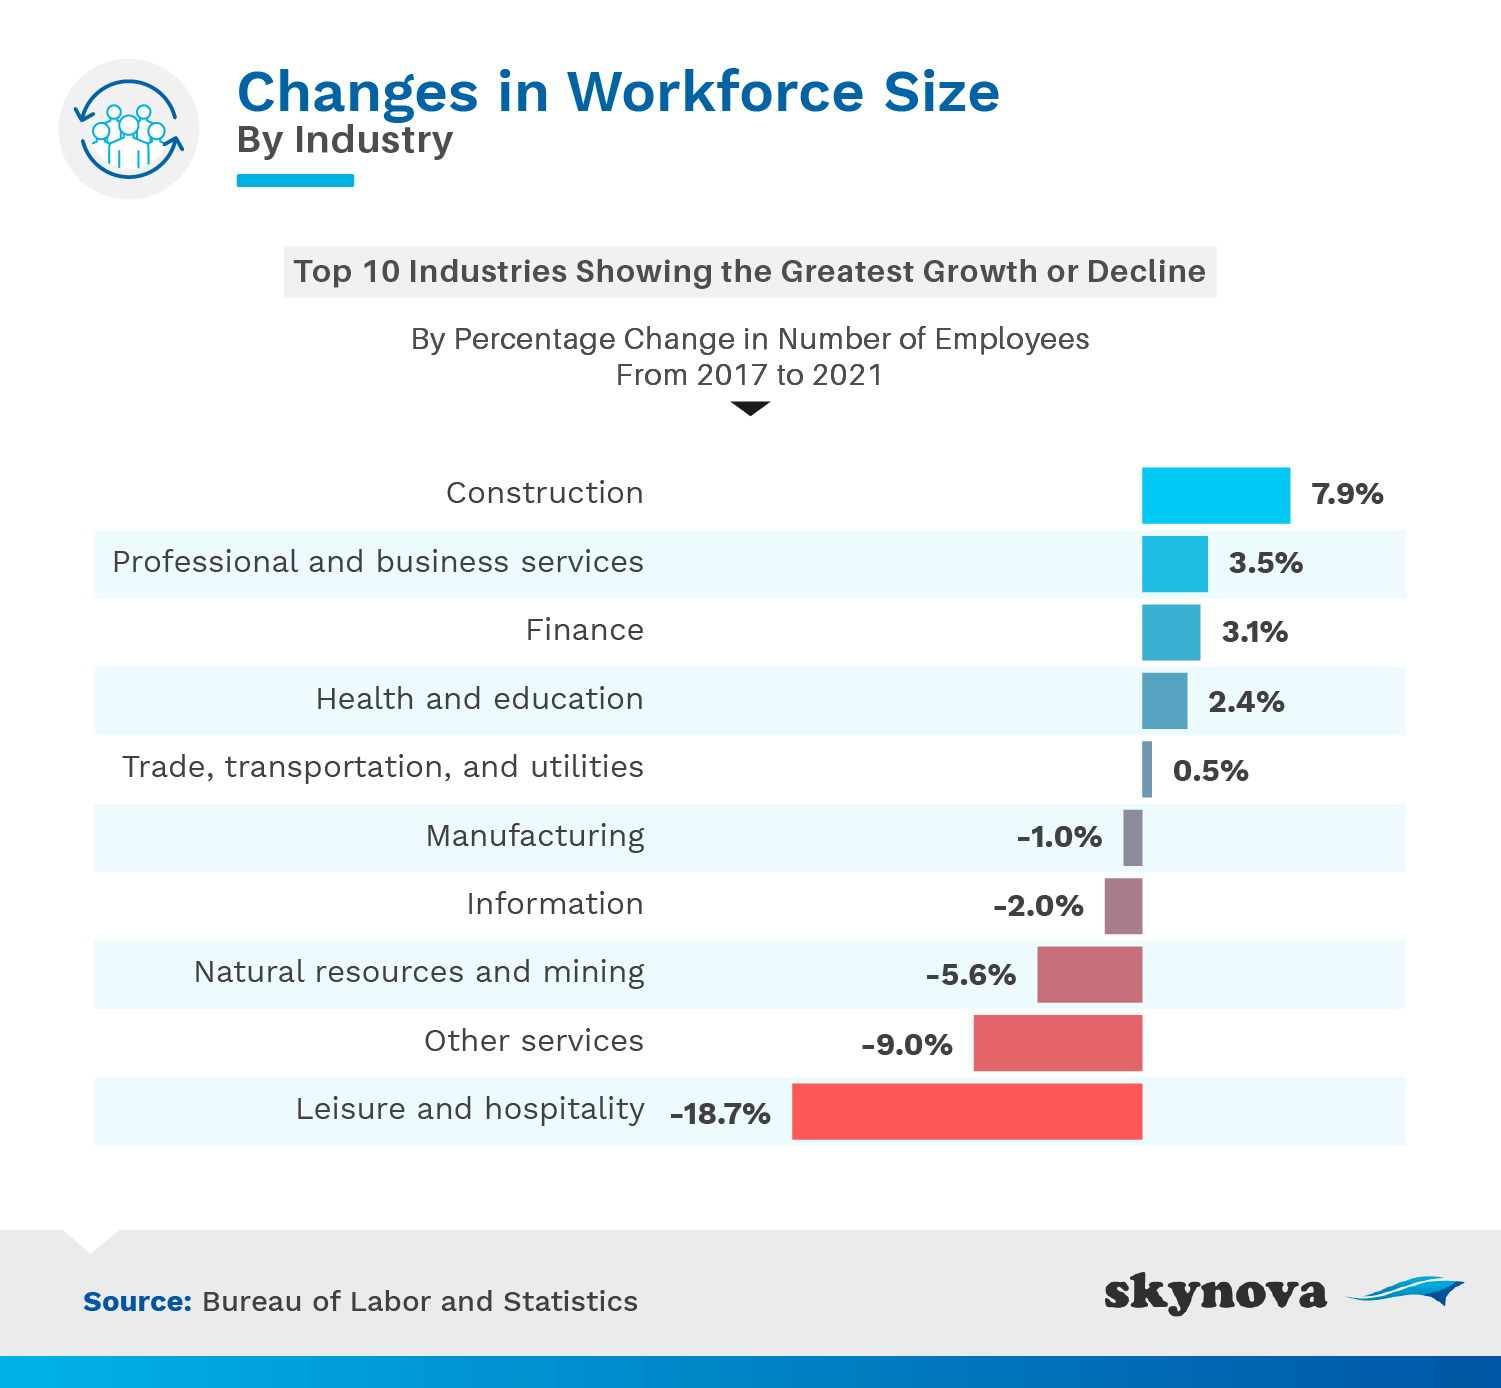 Changes in workforce size